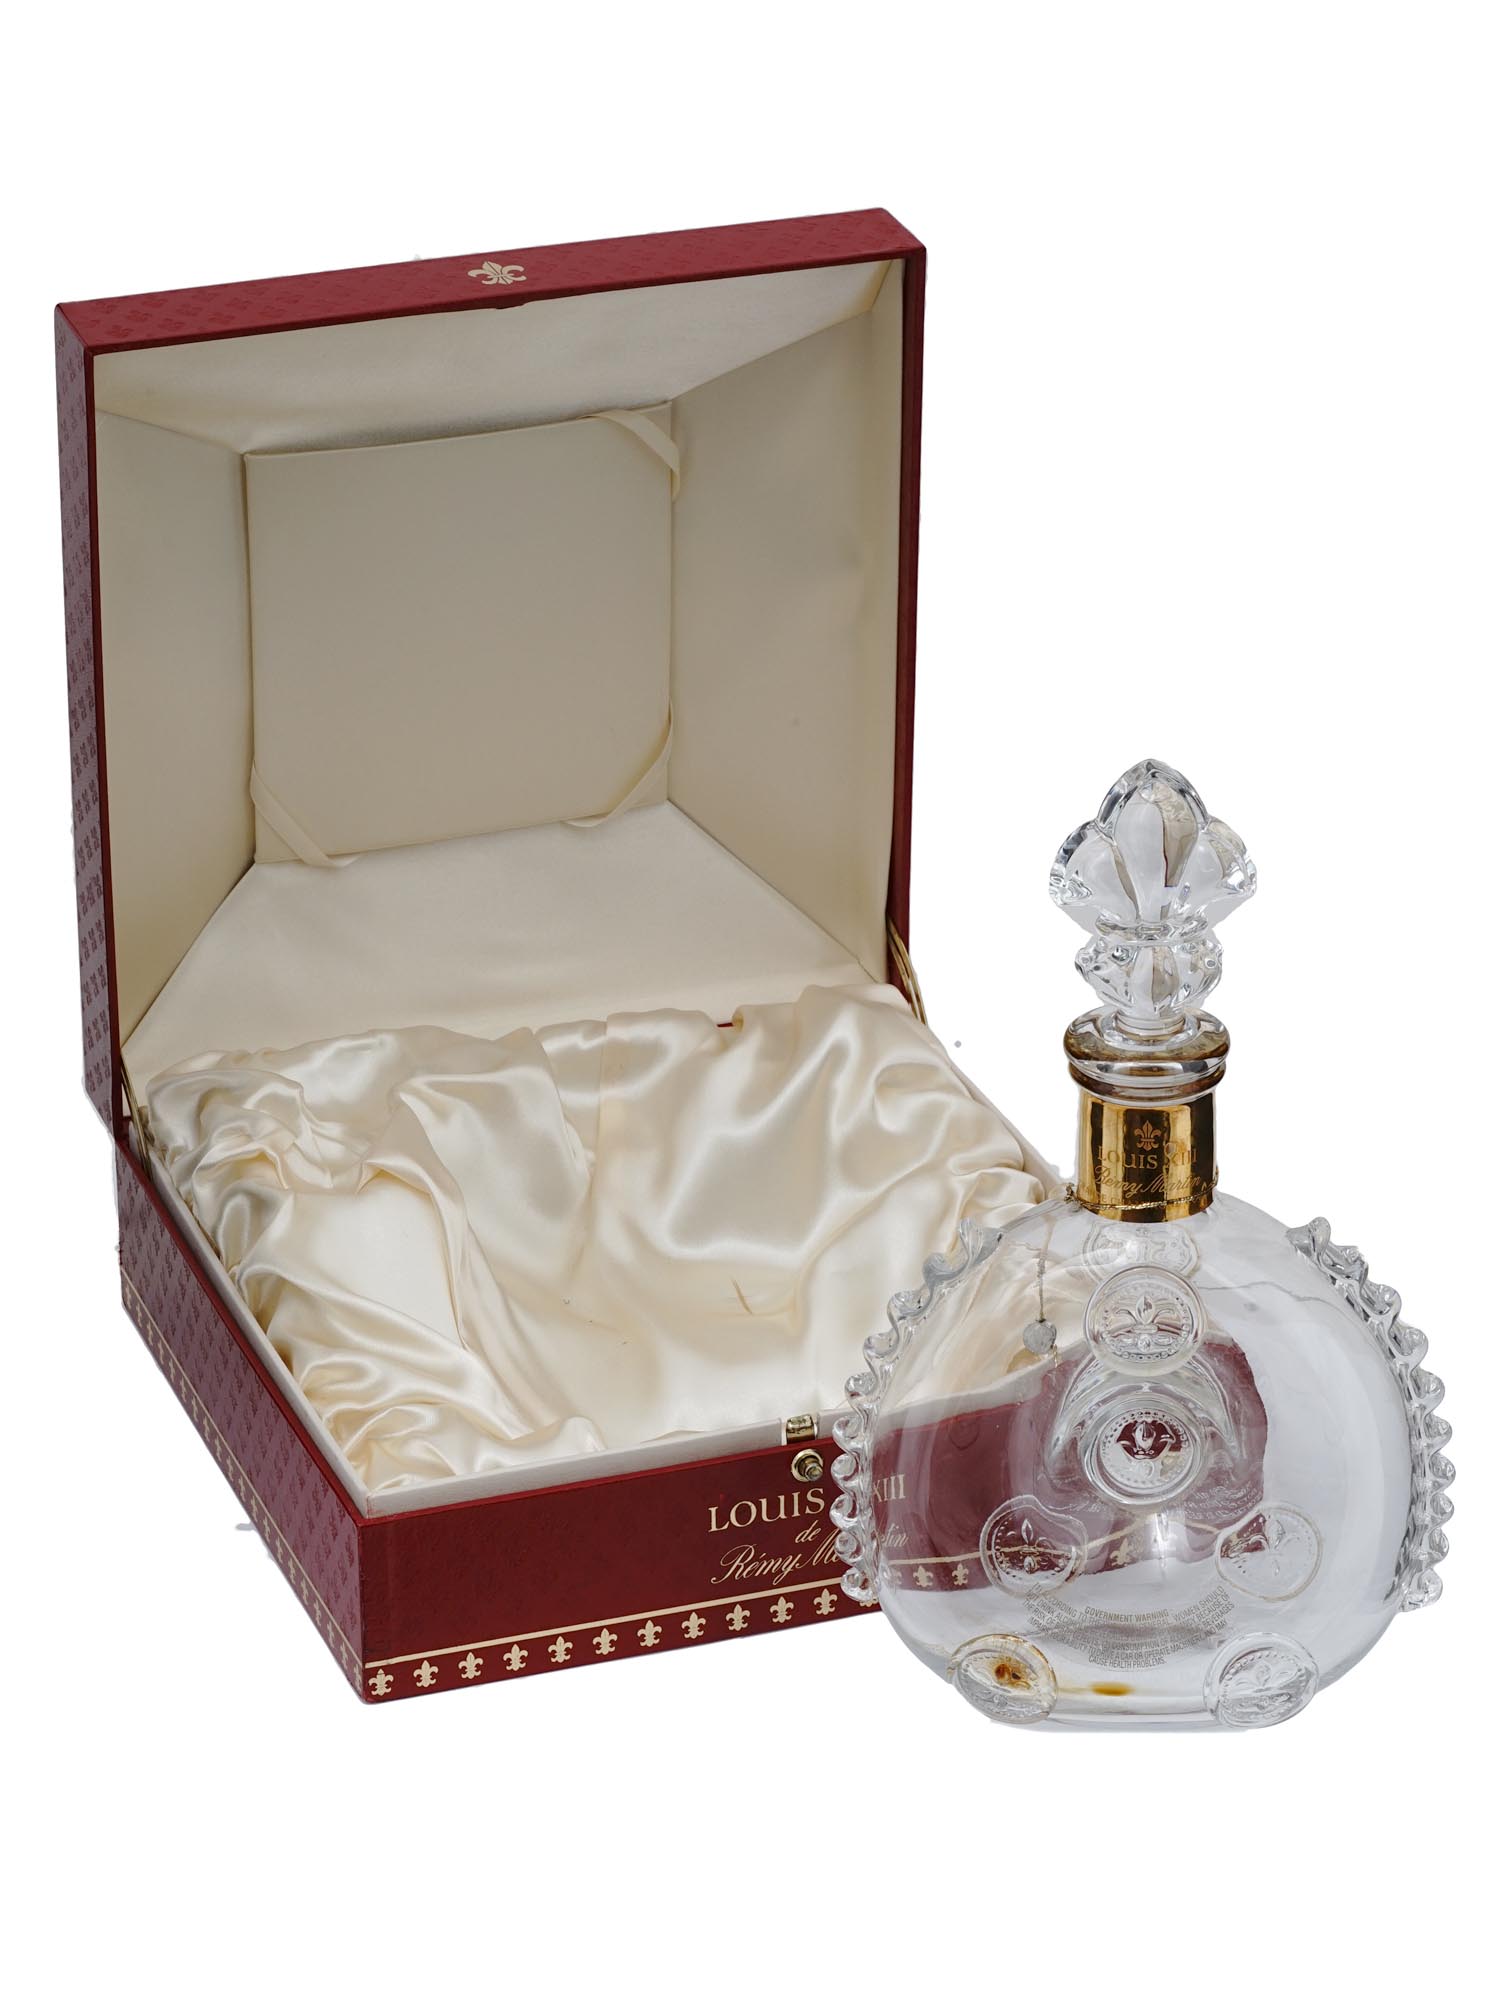 LOUIS XIII REMY MARTIN COGNAC BOTTLE AND RED BOX PIC-0